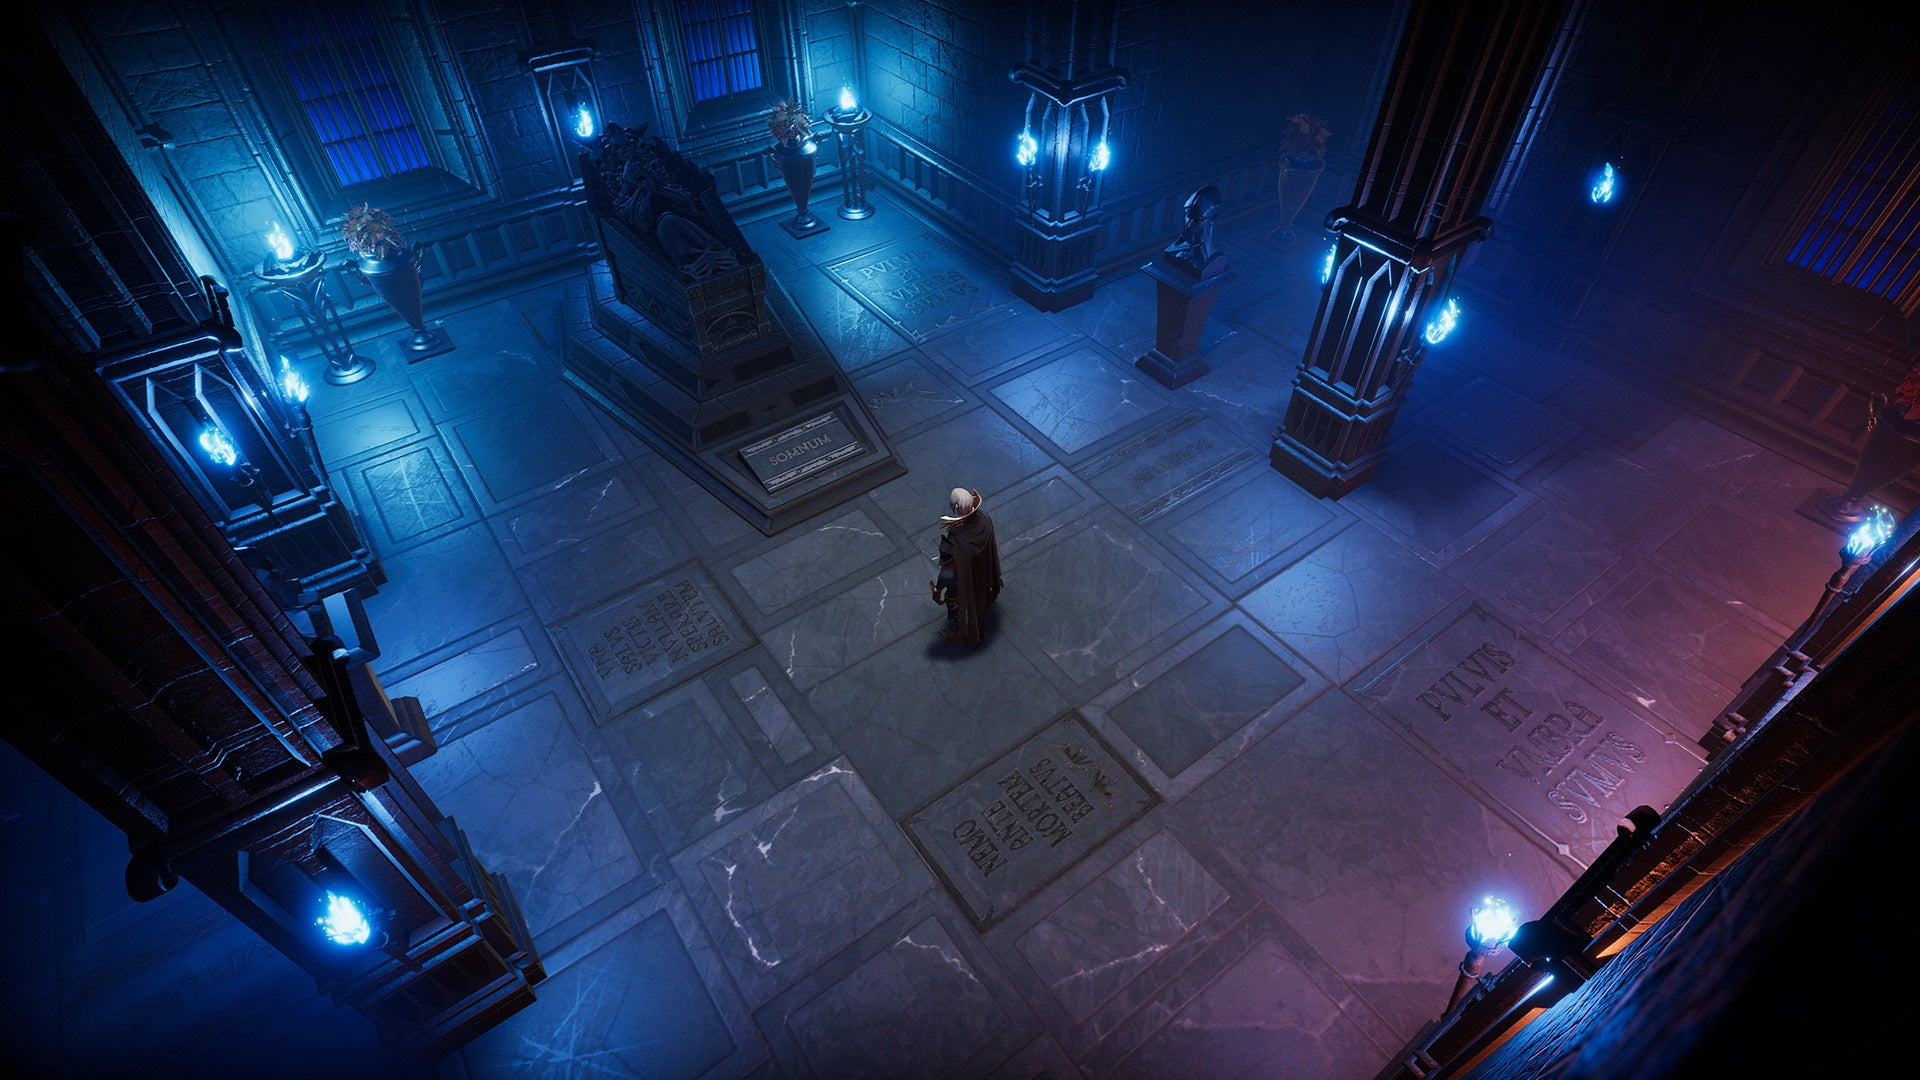 V Rising, character inside a Vampire castle is standing in a dark room looking at a large stone coffin in front of them. Blue flame-lit torches line the room.